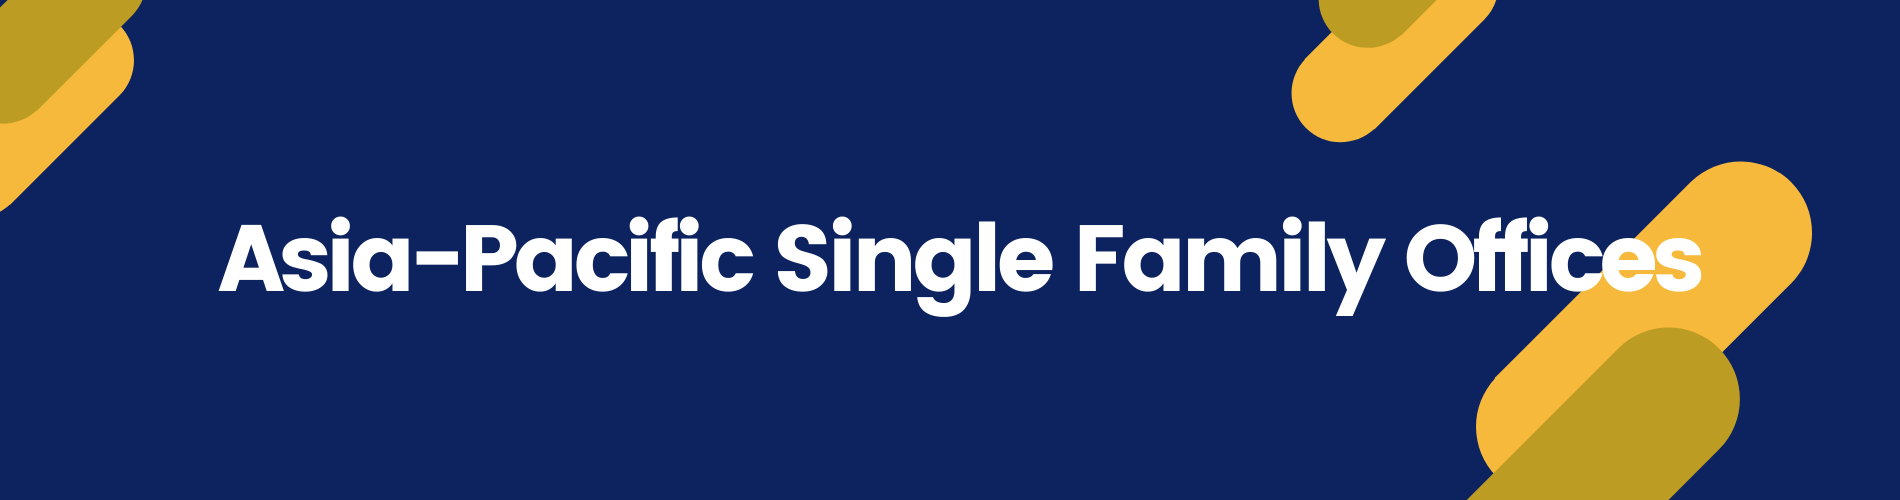 Single Family Offices Asia Pacific